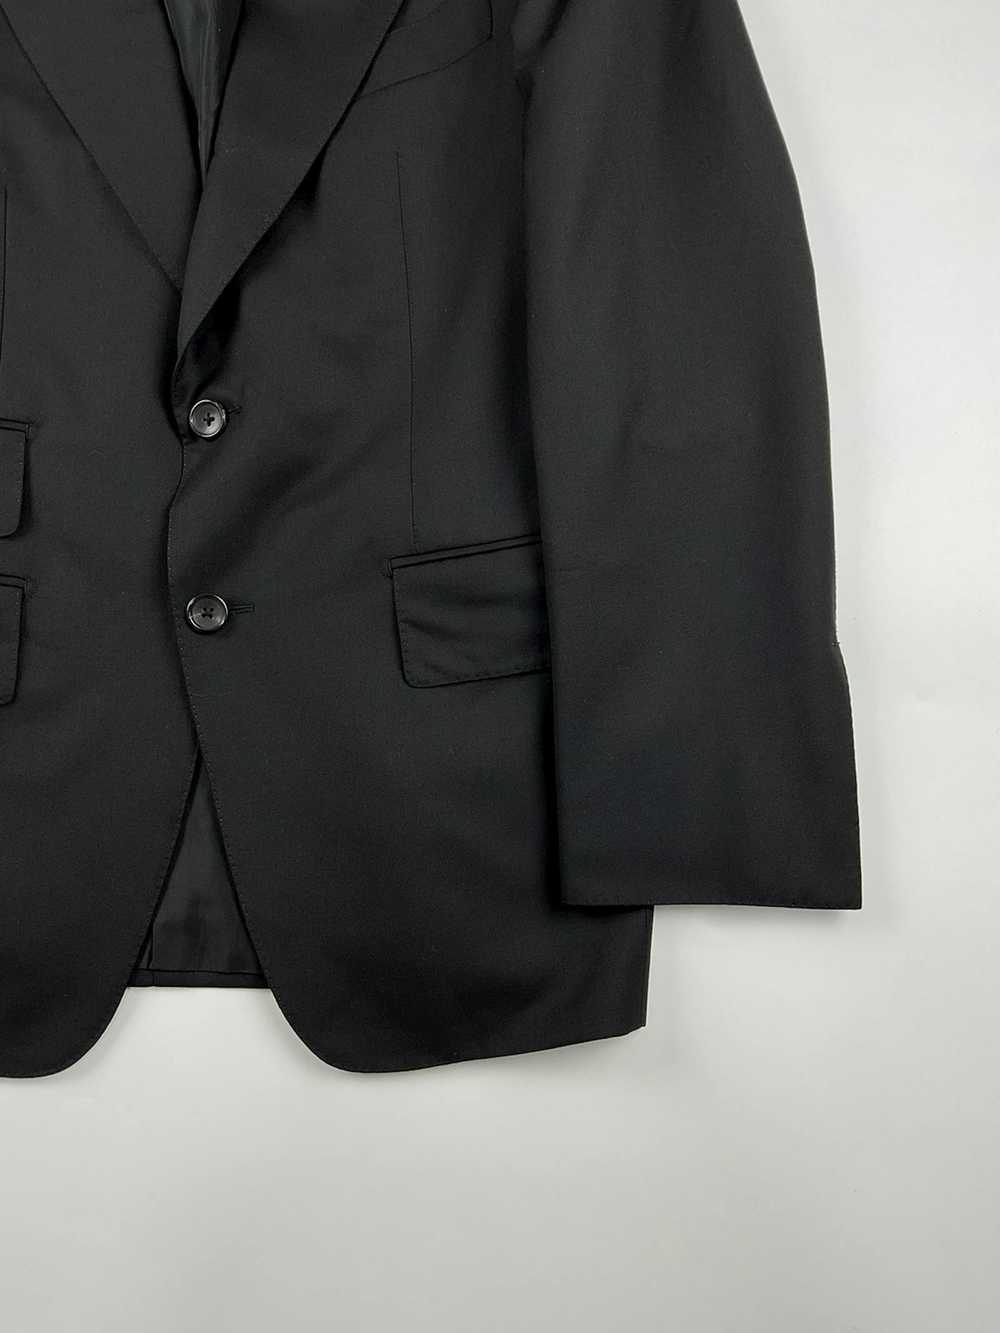 Tom Ford Tom Ford Fit A Jacket - image 6